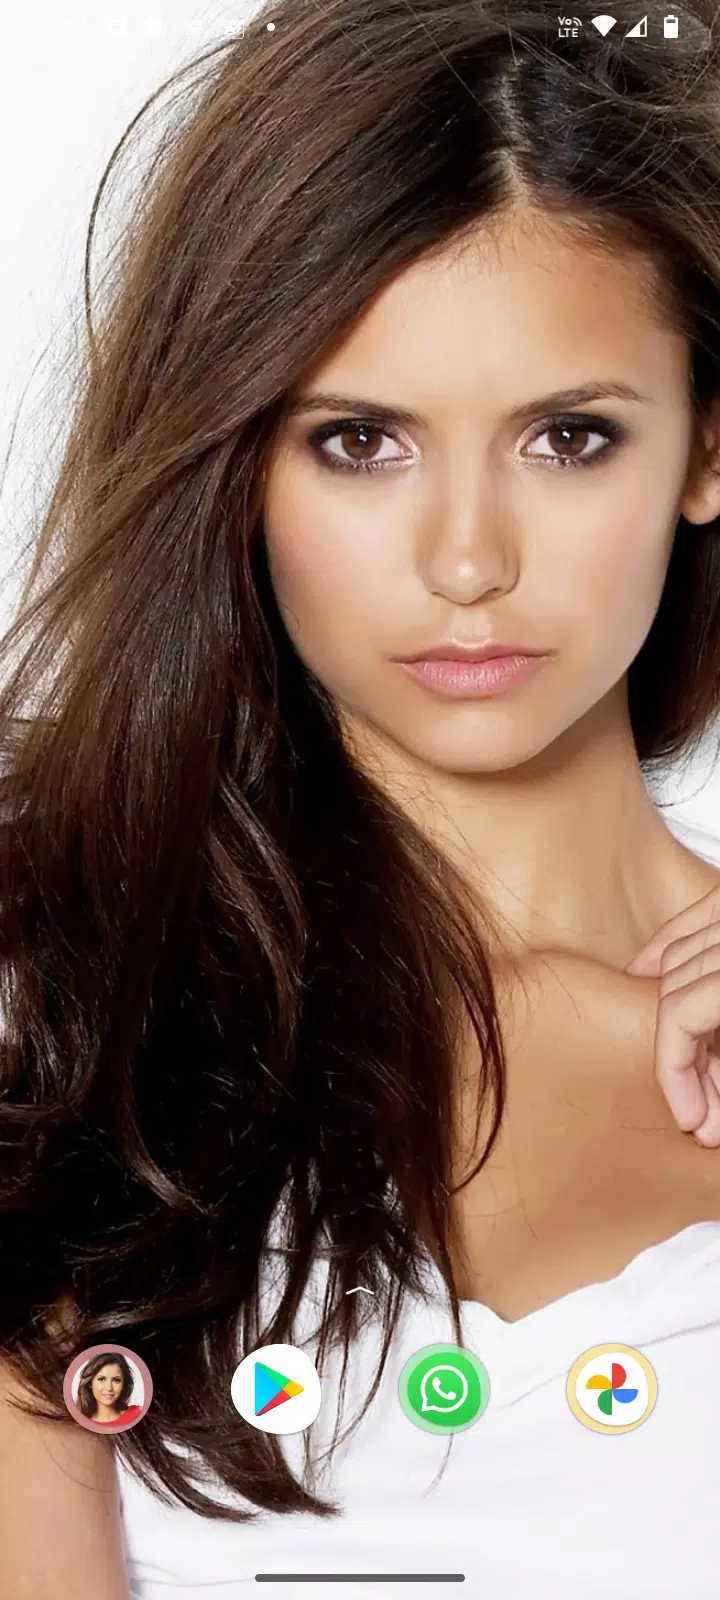 Nina dobrev wallpapers apk for android download